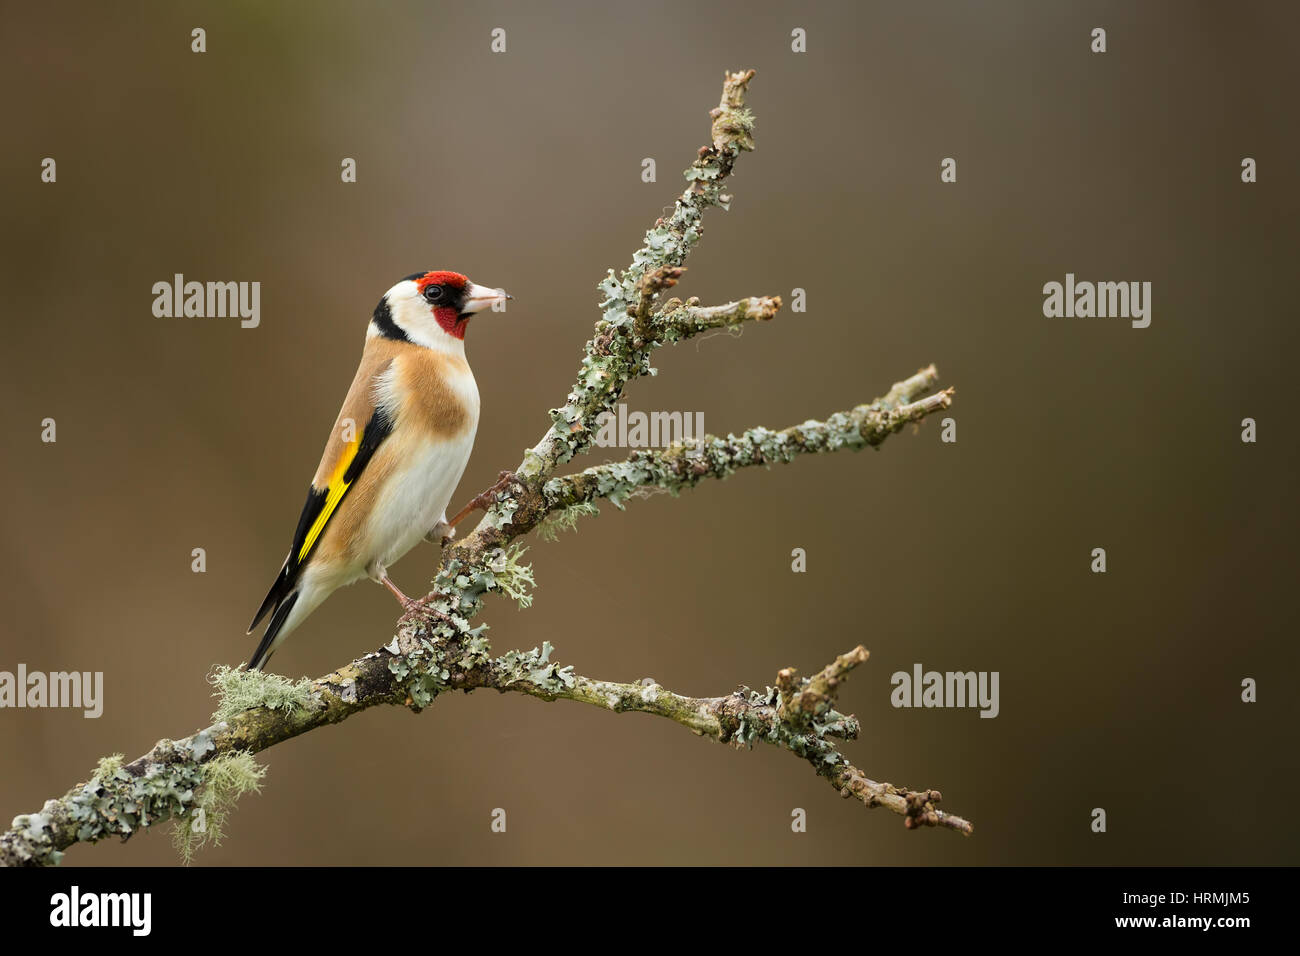 A Goldfinch, Carduelis carduelis, on the left perched on a lichen covered branch looking right with a blurred background Stock Photo